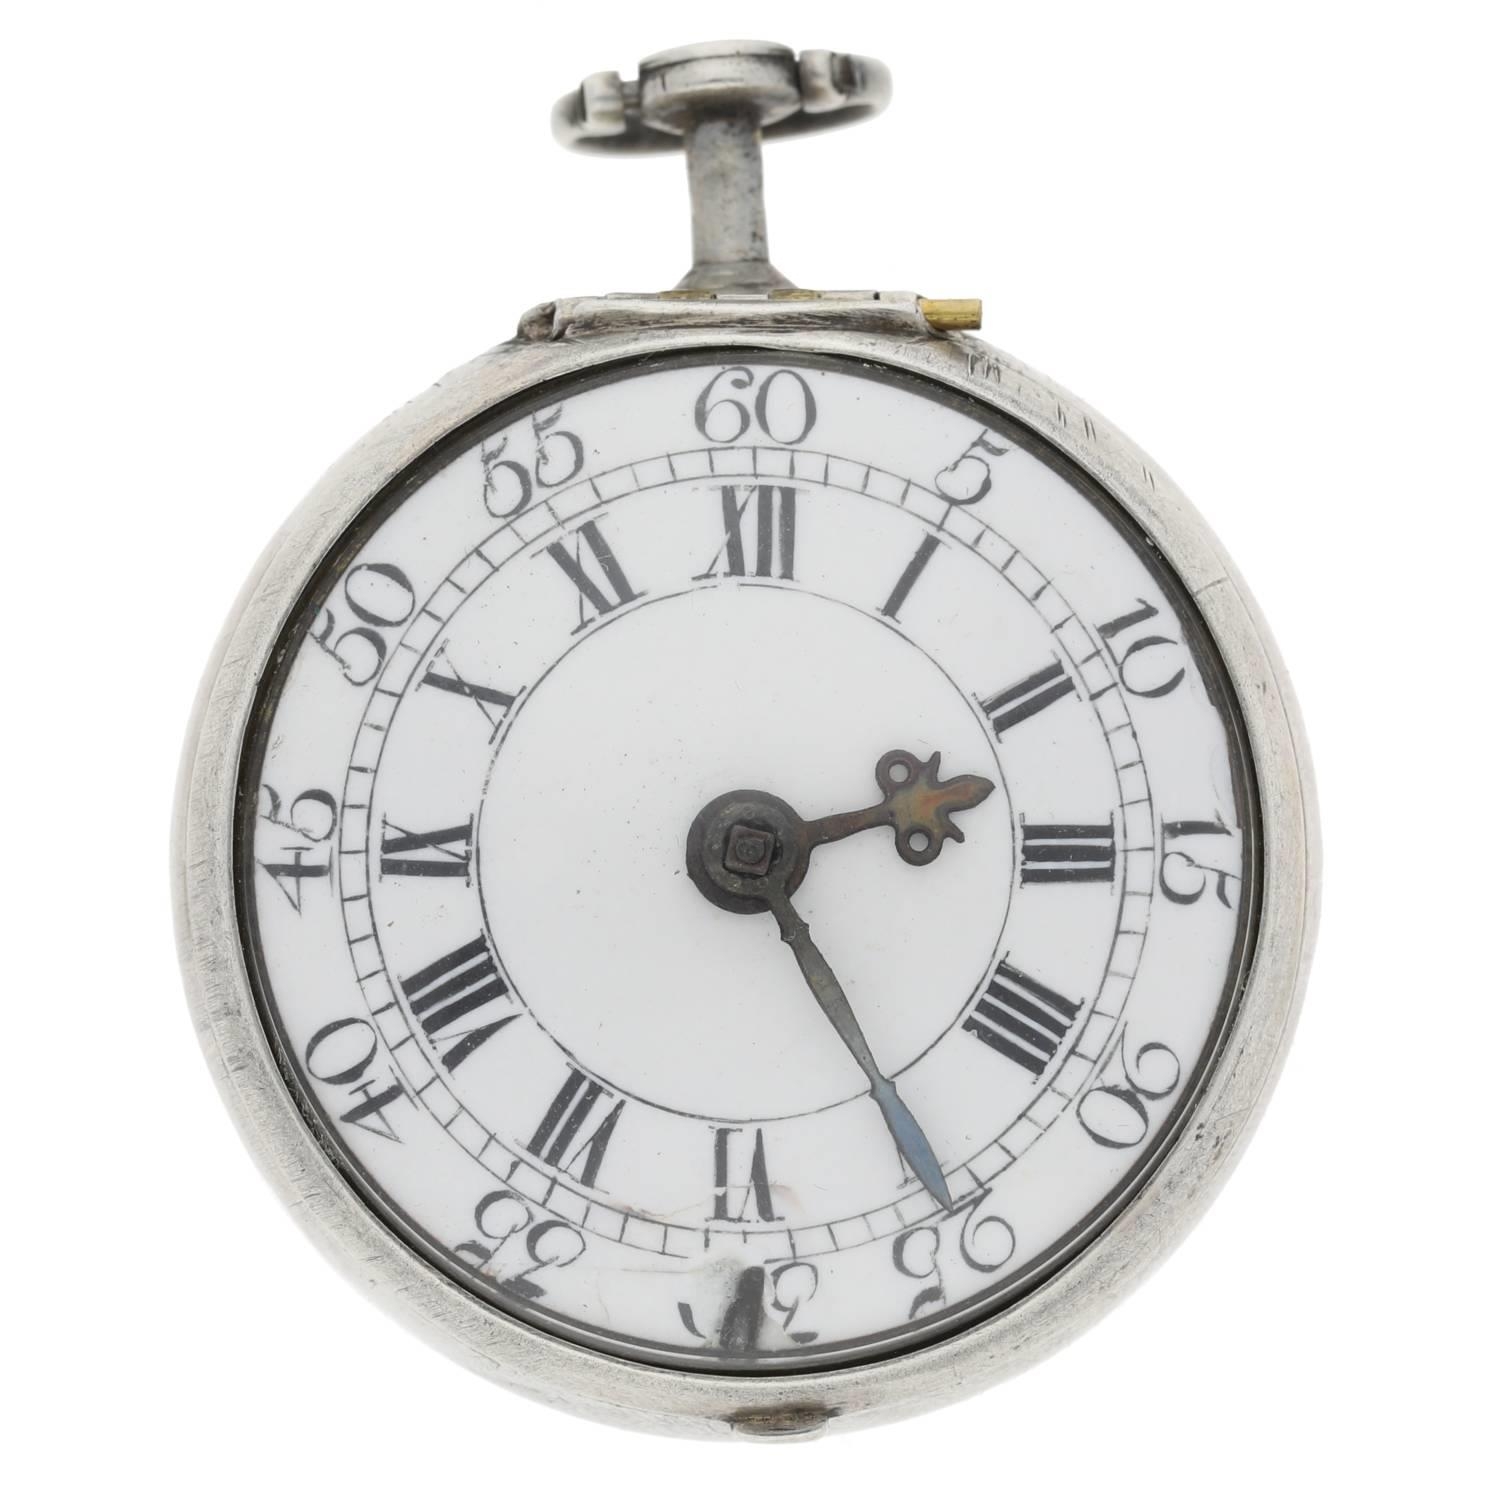 J. Roberts, London - George II English silver pair cased verge pocket watch, London 1759, signed - Image 3 of 10